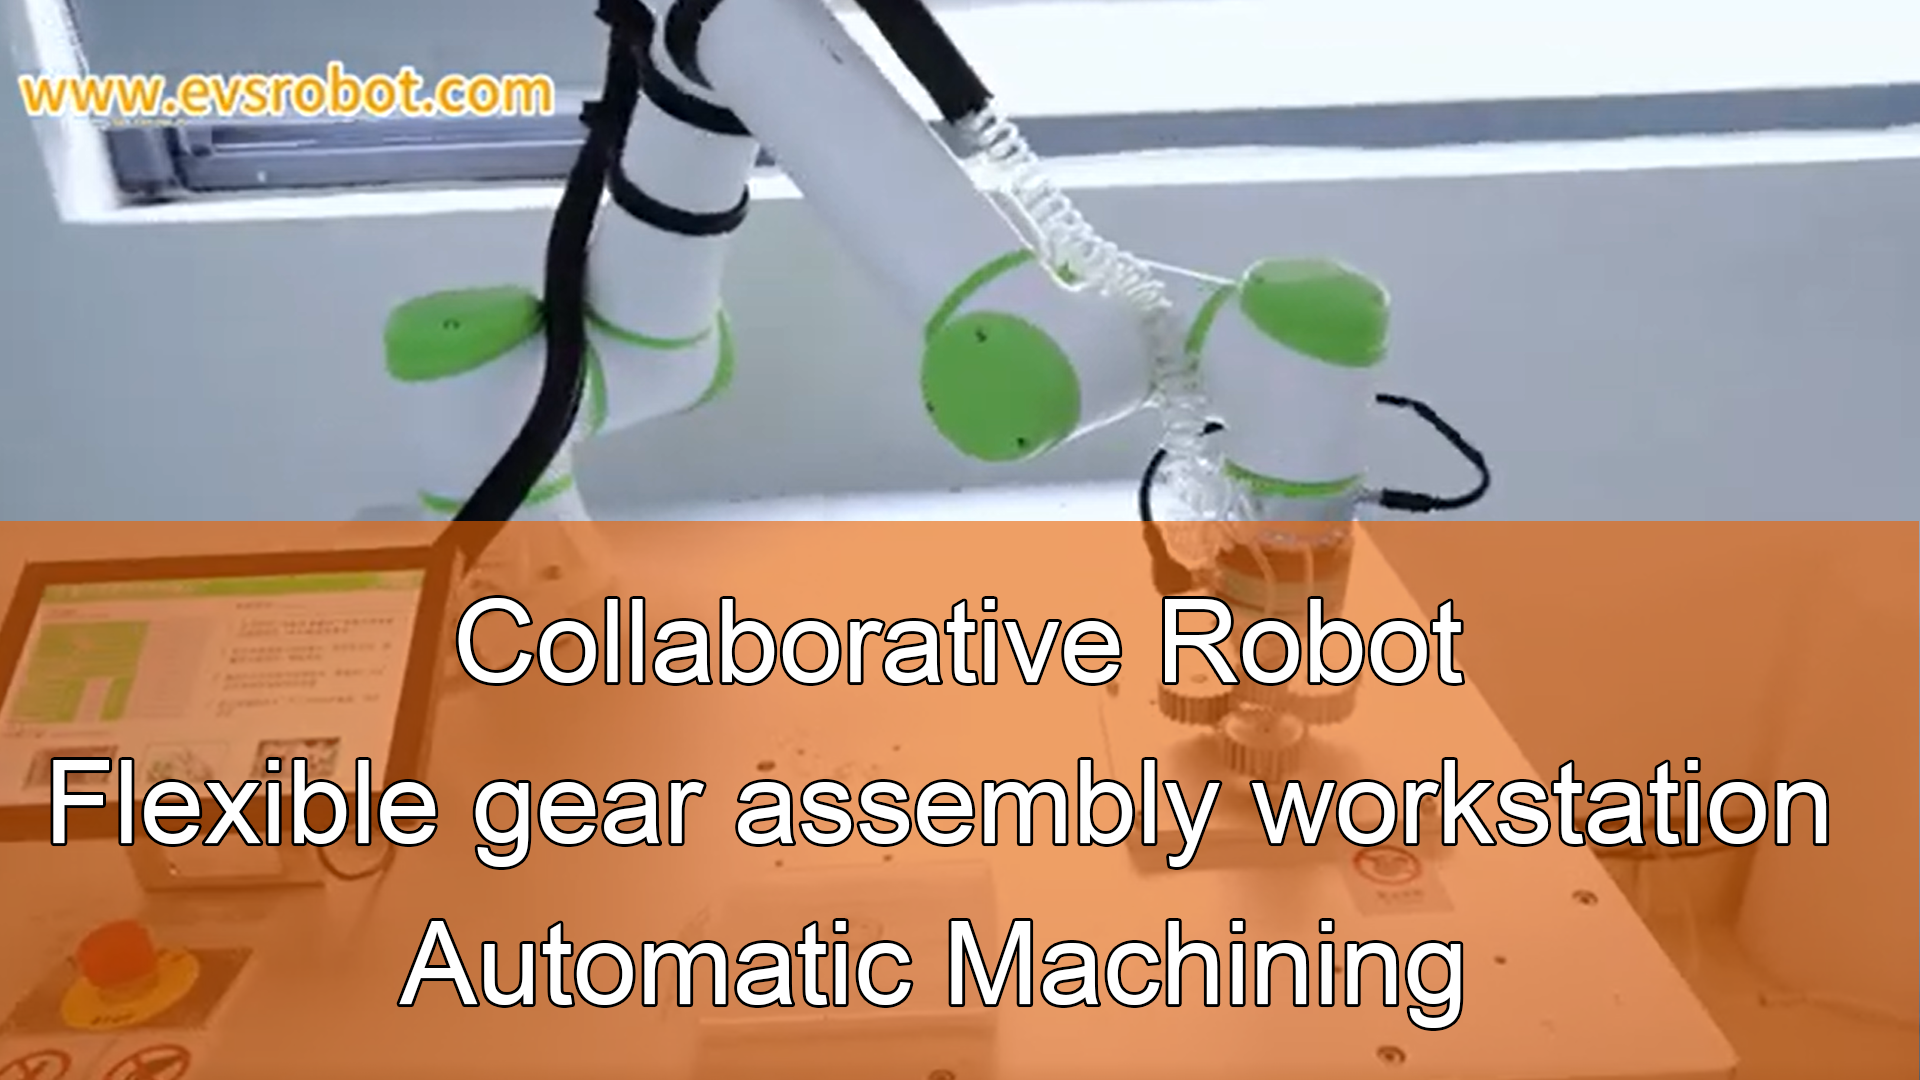 Collaborative robot/Flexible gear assembly workstation/Automatic Machining